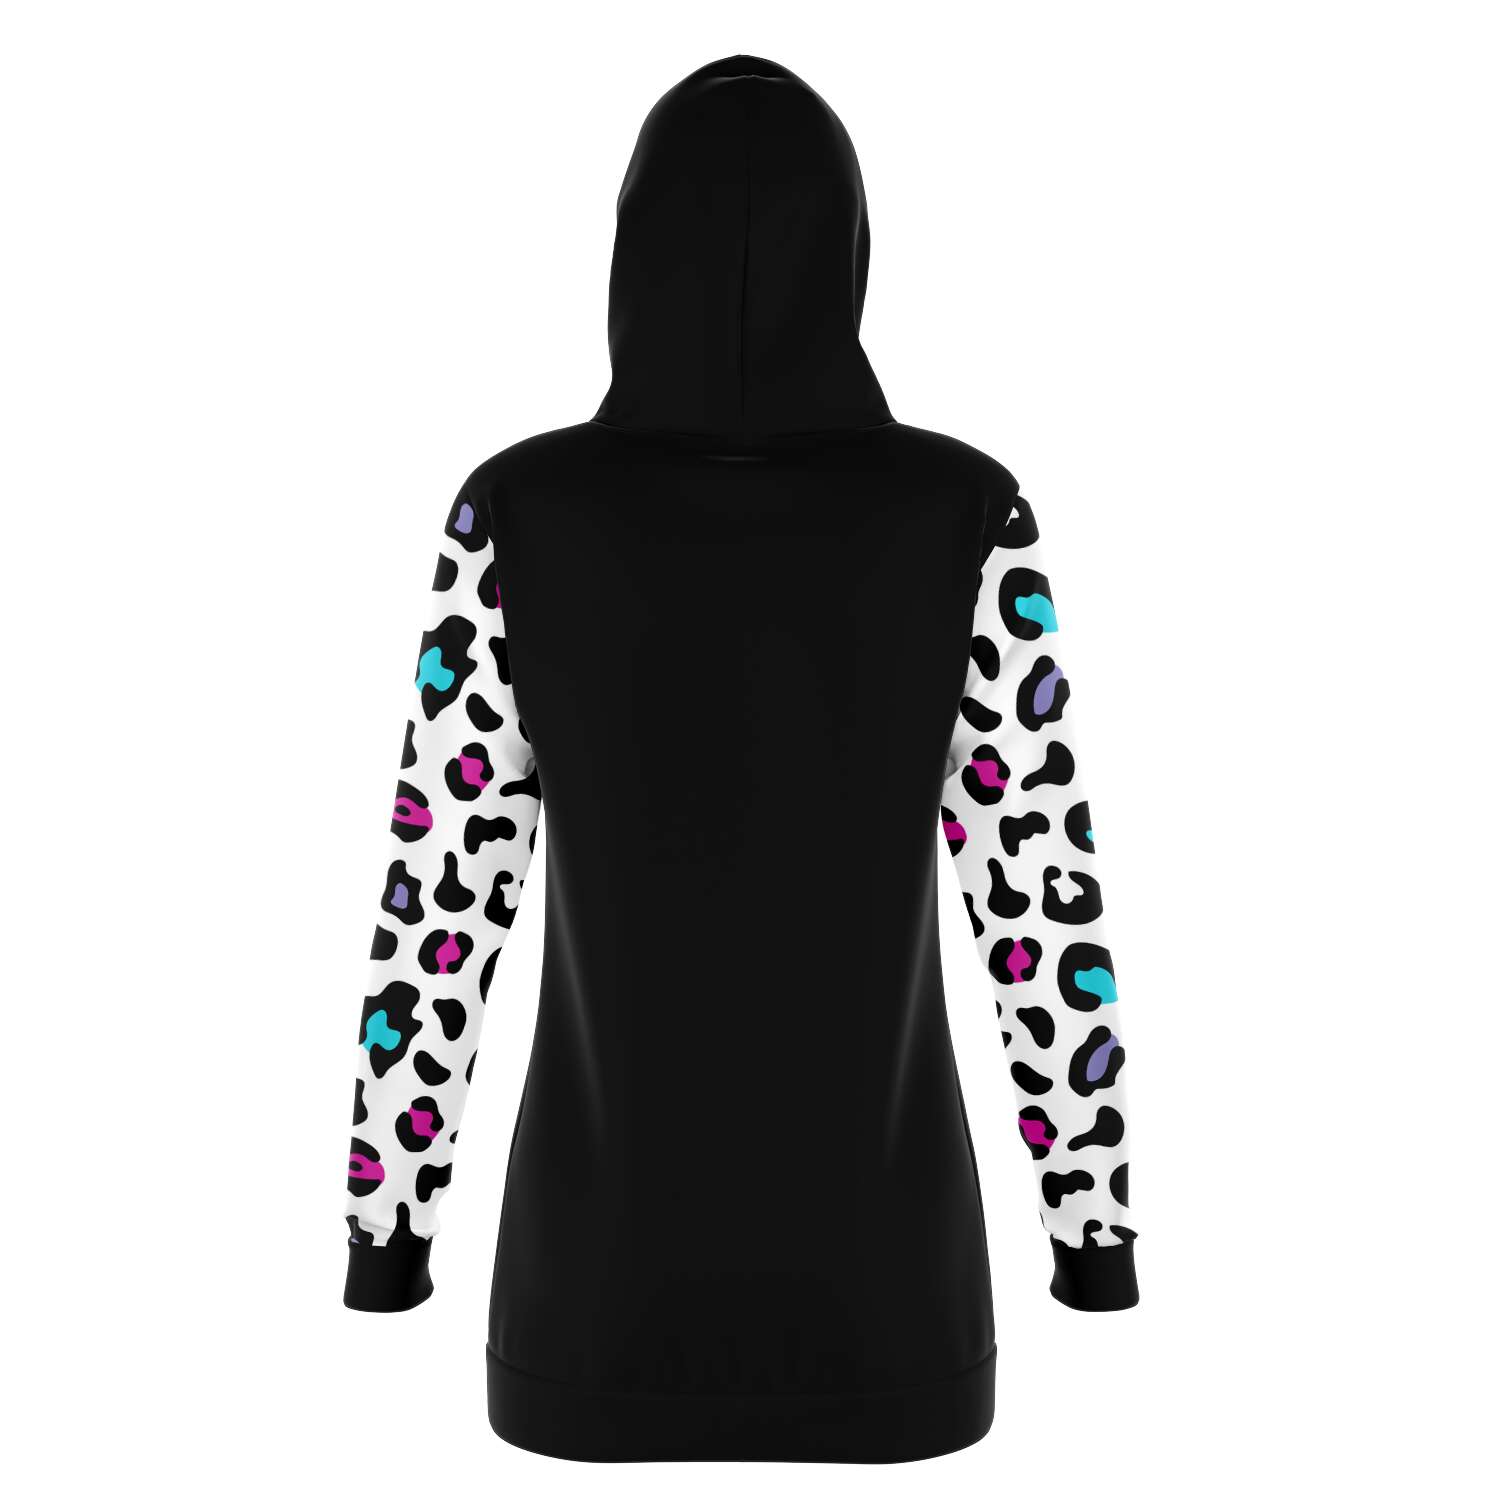 "Squat because no one raps about LITTLE BUTTS" Women's Colorful Leopard Print Long Hoodie